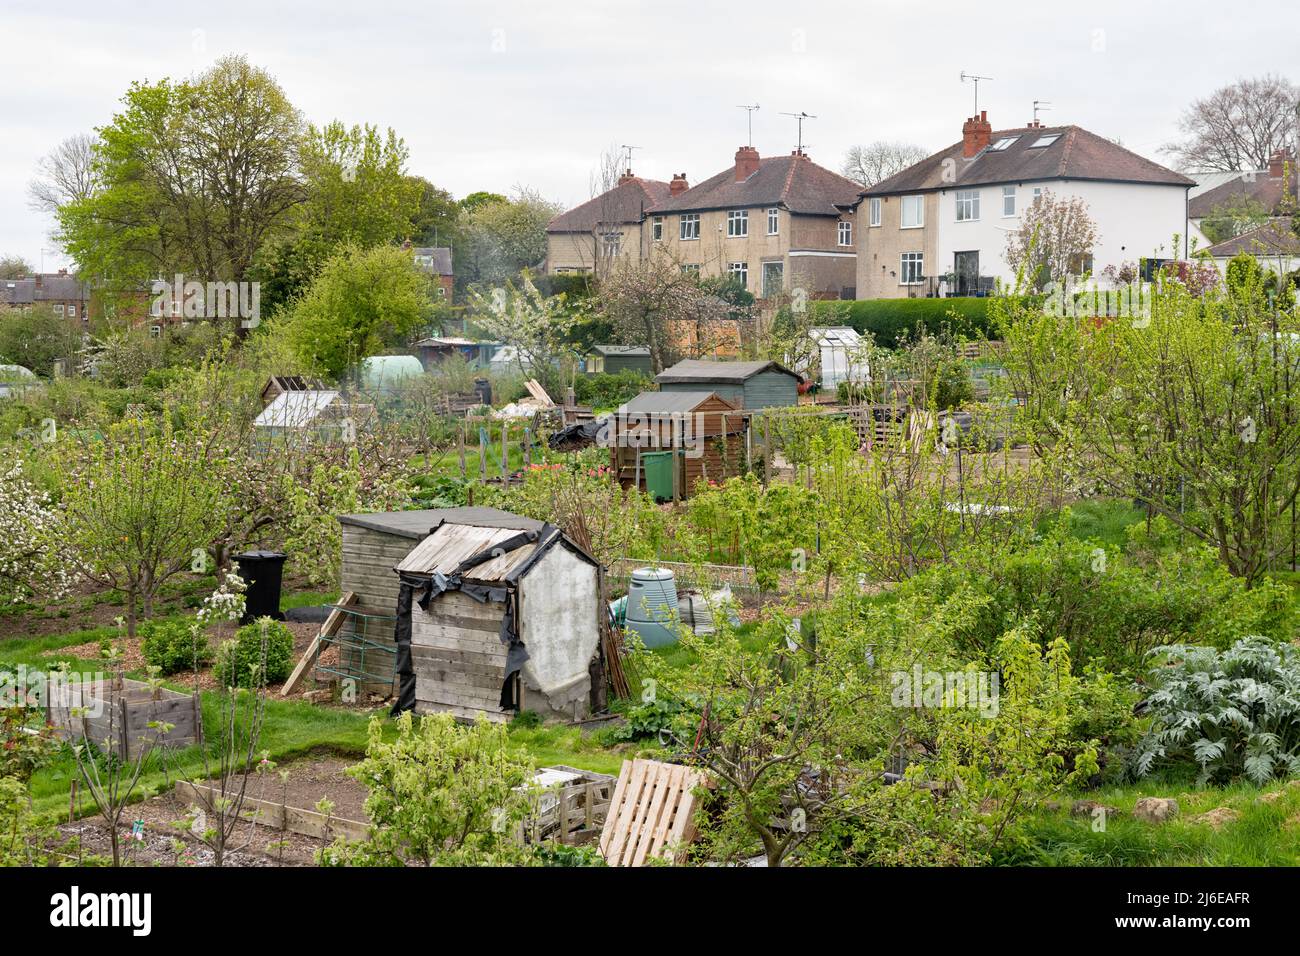 Allotments in UK - Gledhow Valley Allotments with typical terraced housing in Chapel Allerton, Leeds, England Stock Photo